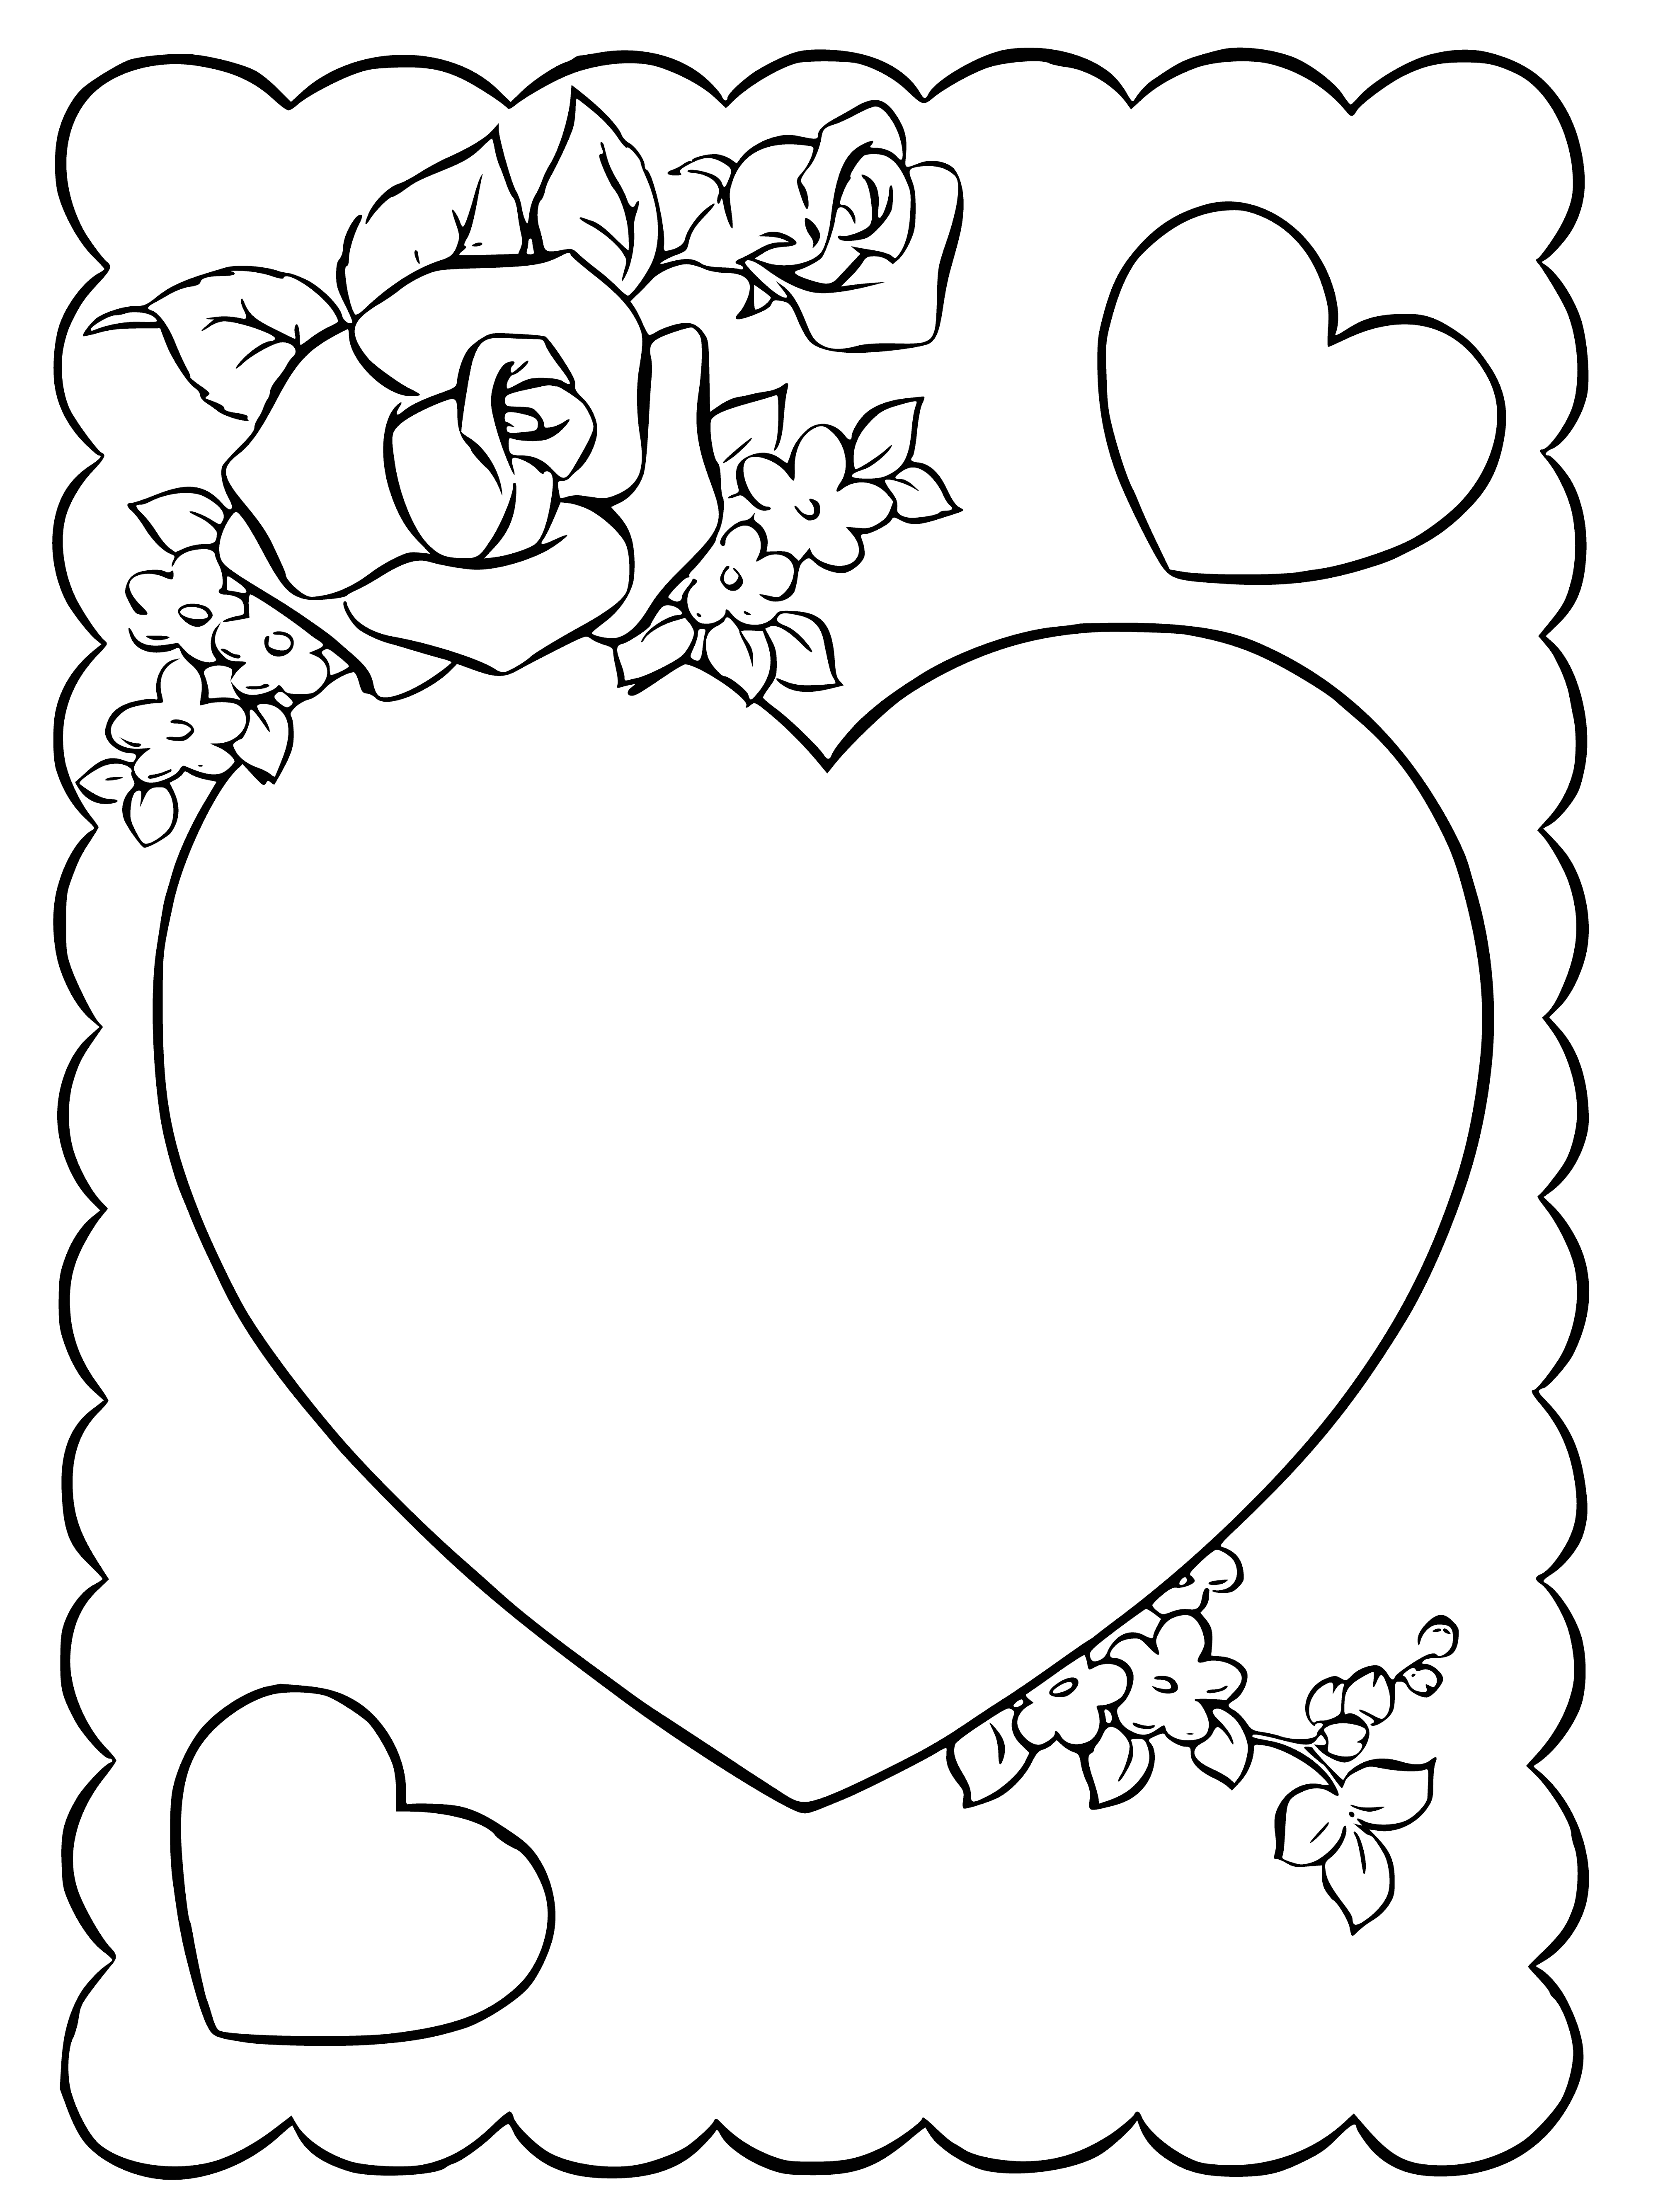 coloring page: A red heart with white flower frame on yellow backdrop wishes Happy Valentine's Day.